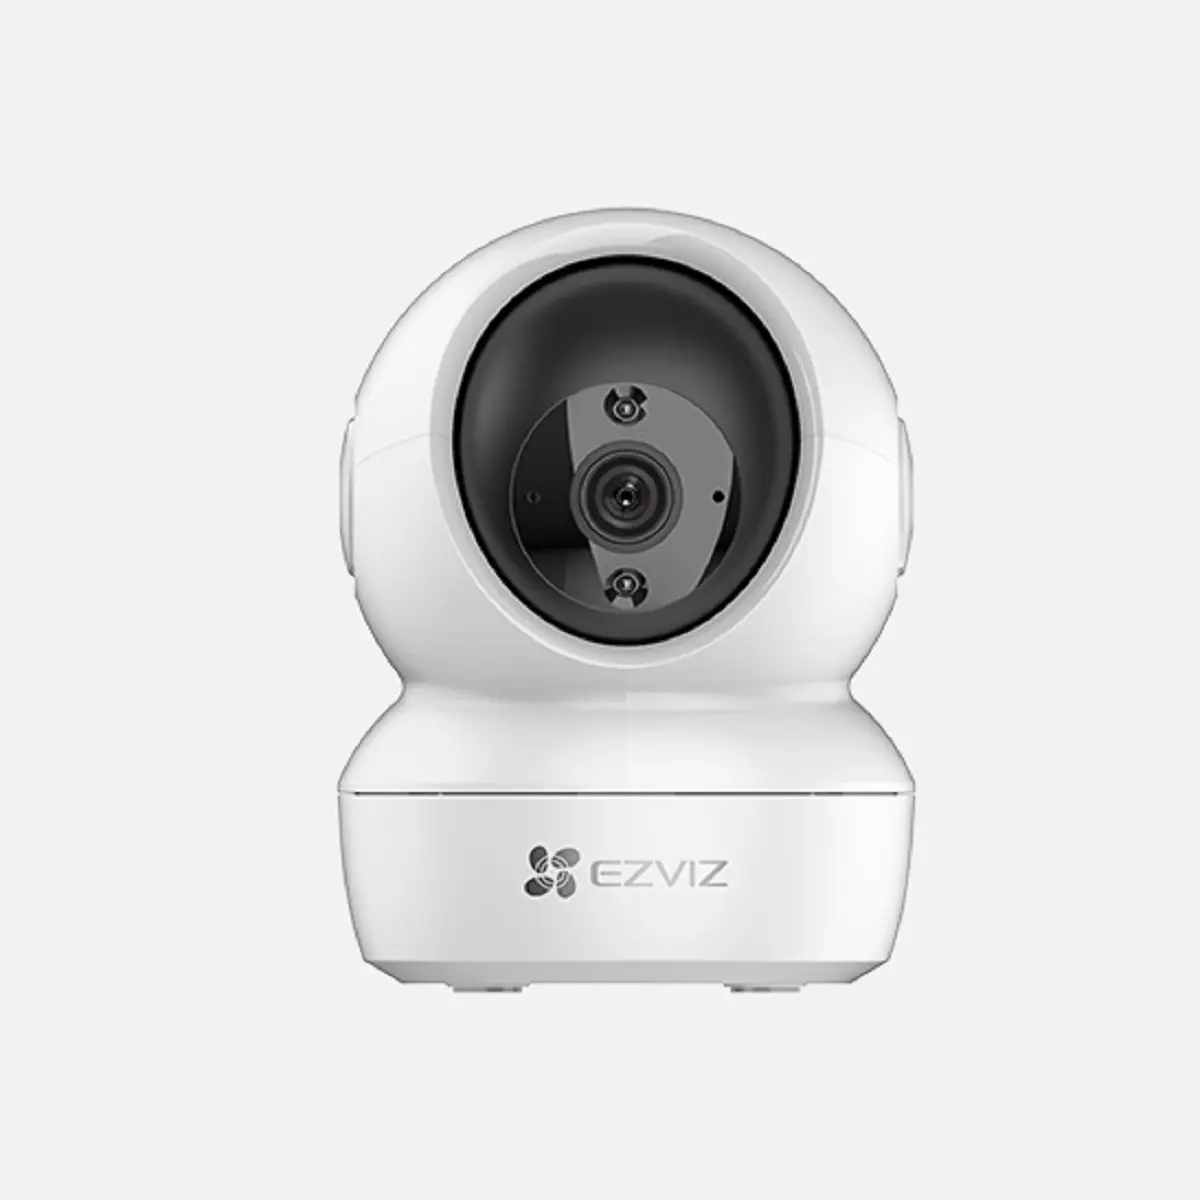 Hikvision Ezviz 4MP CCTV Camera 360 degree 2K H6C Internet With sd card supported-Trade Nepal